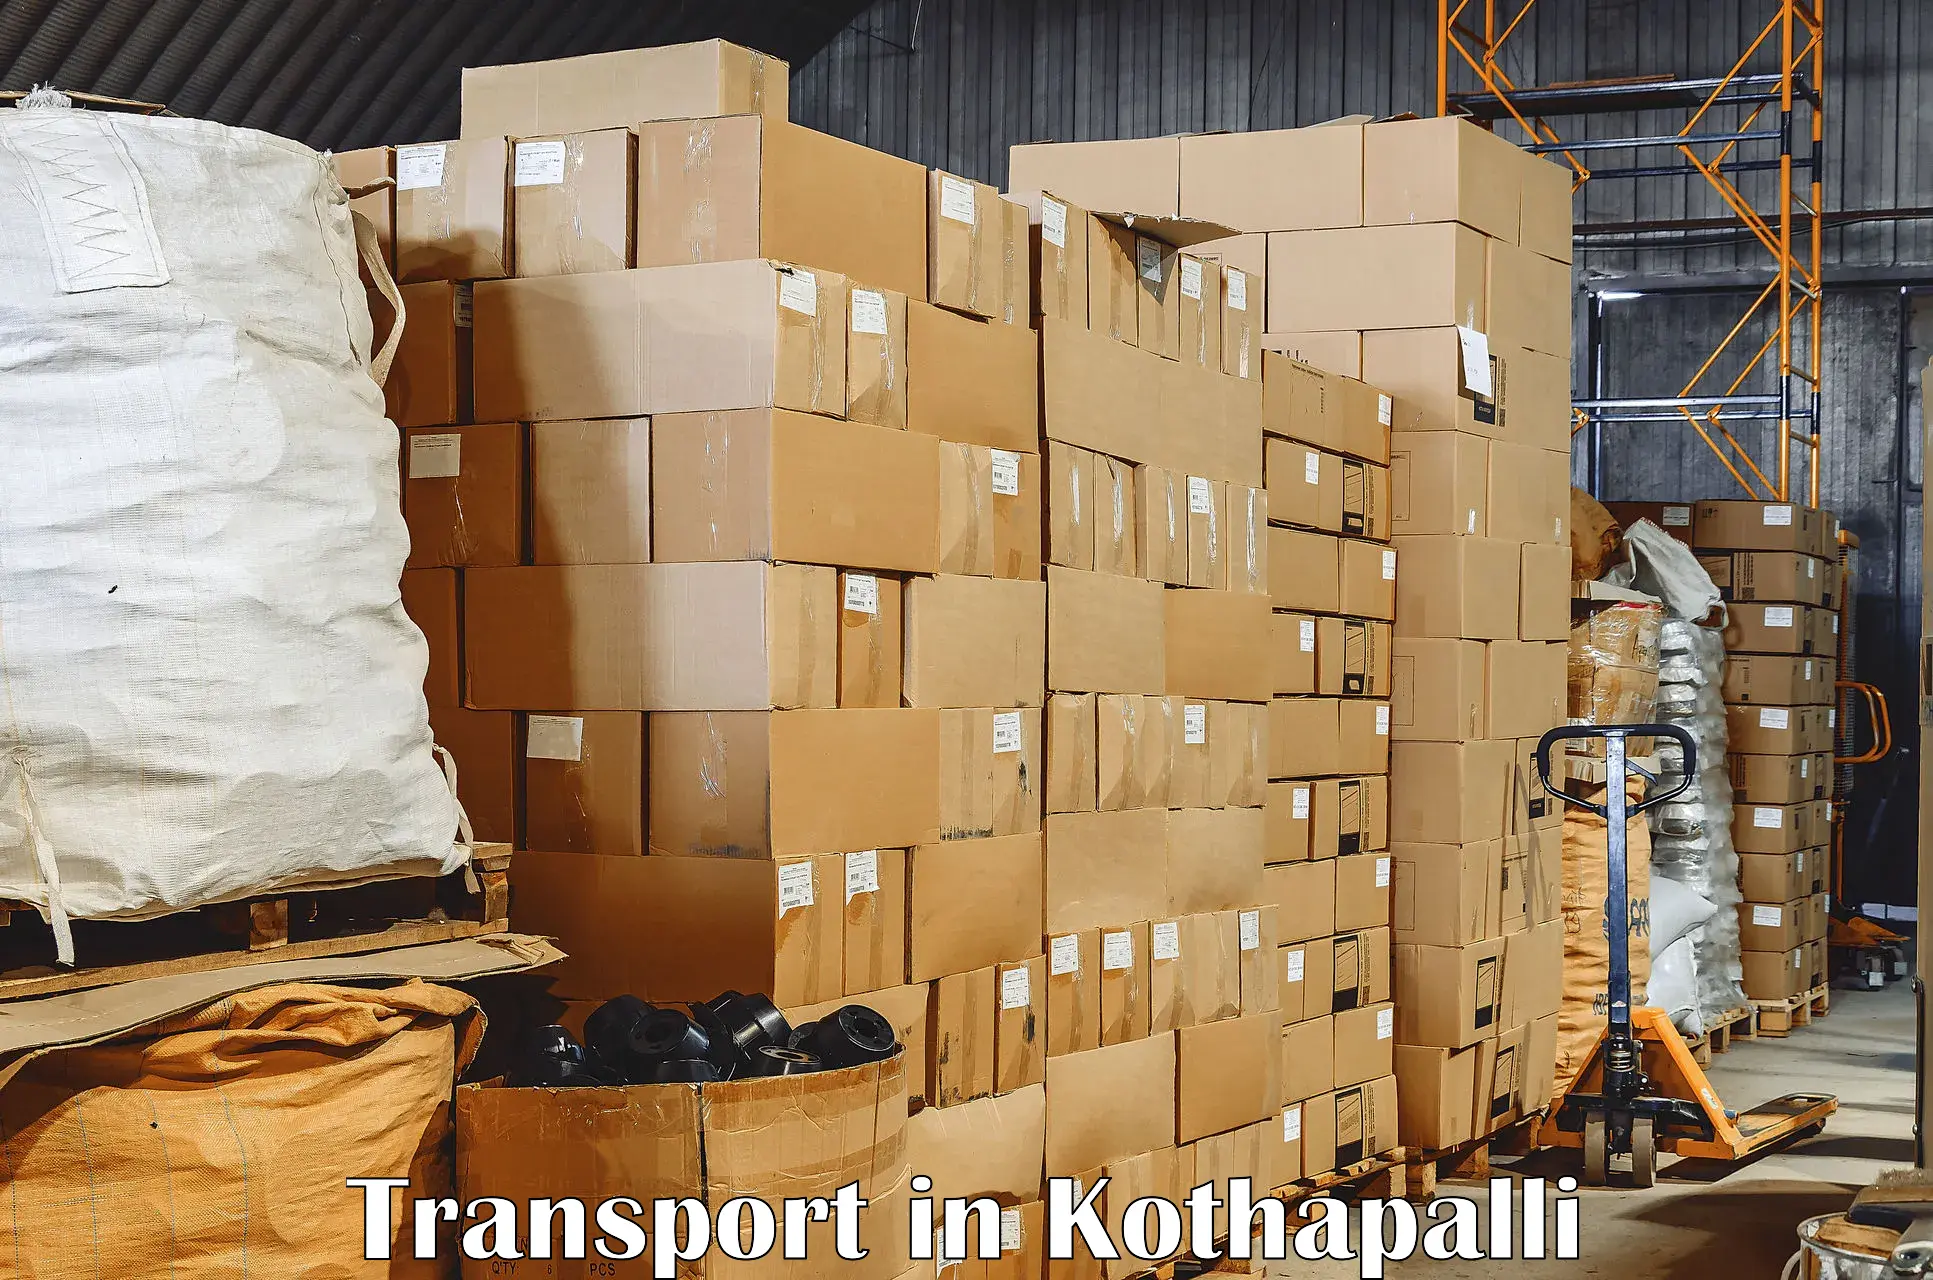 Daily transport service in Kothapalli